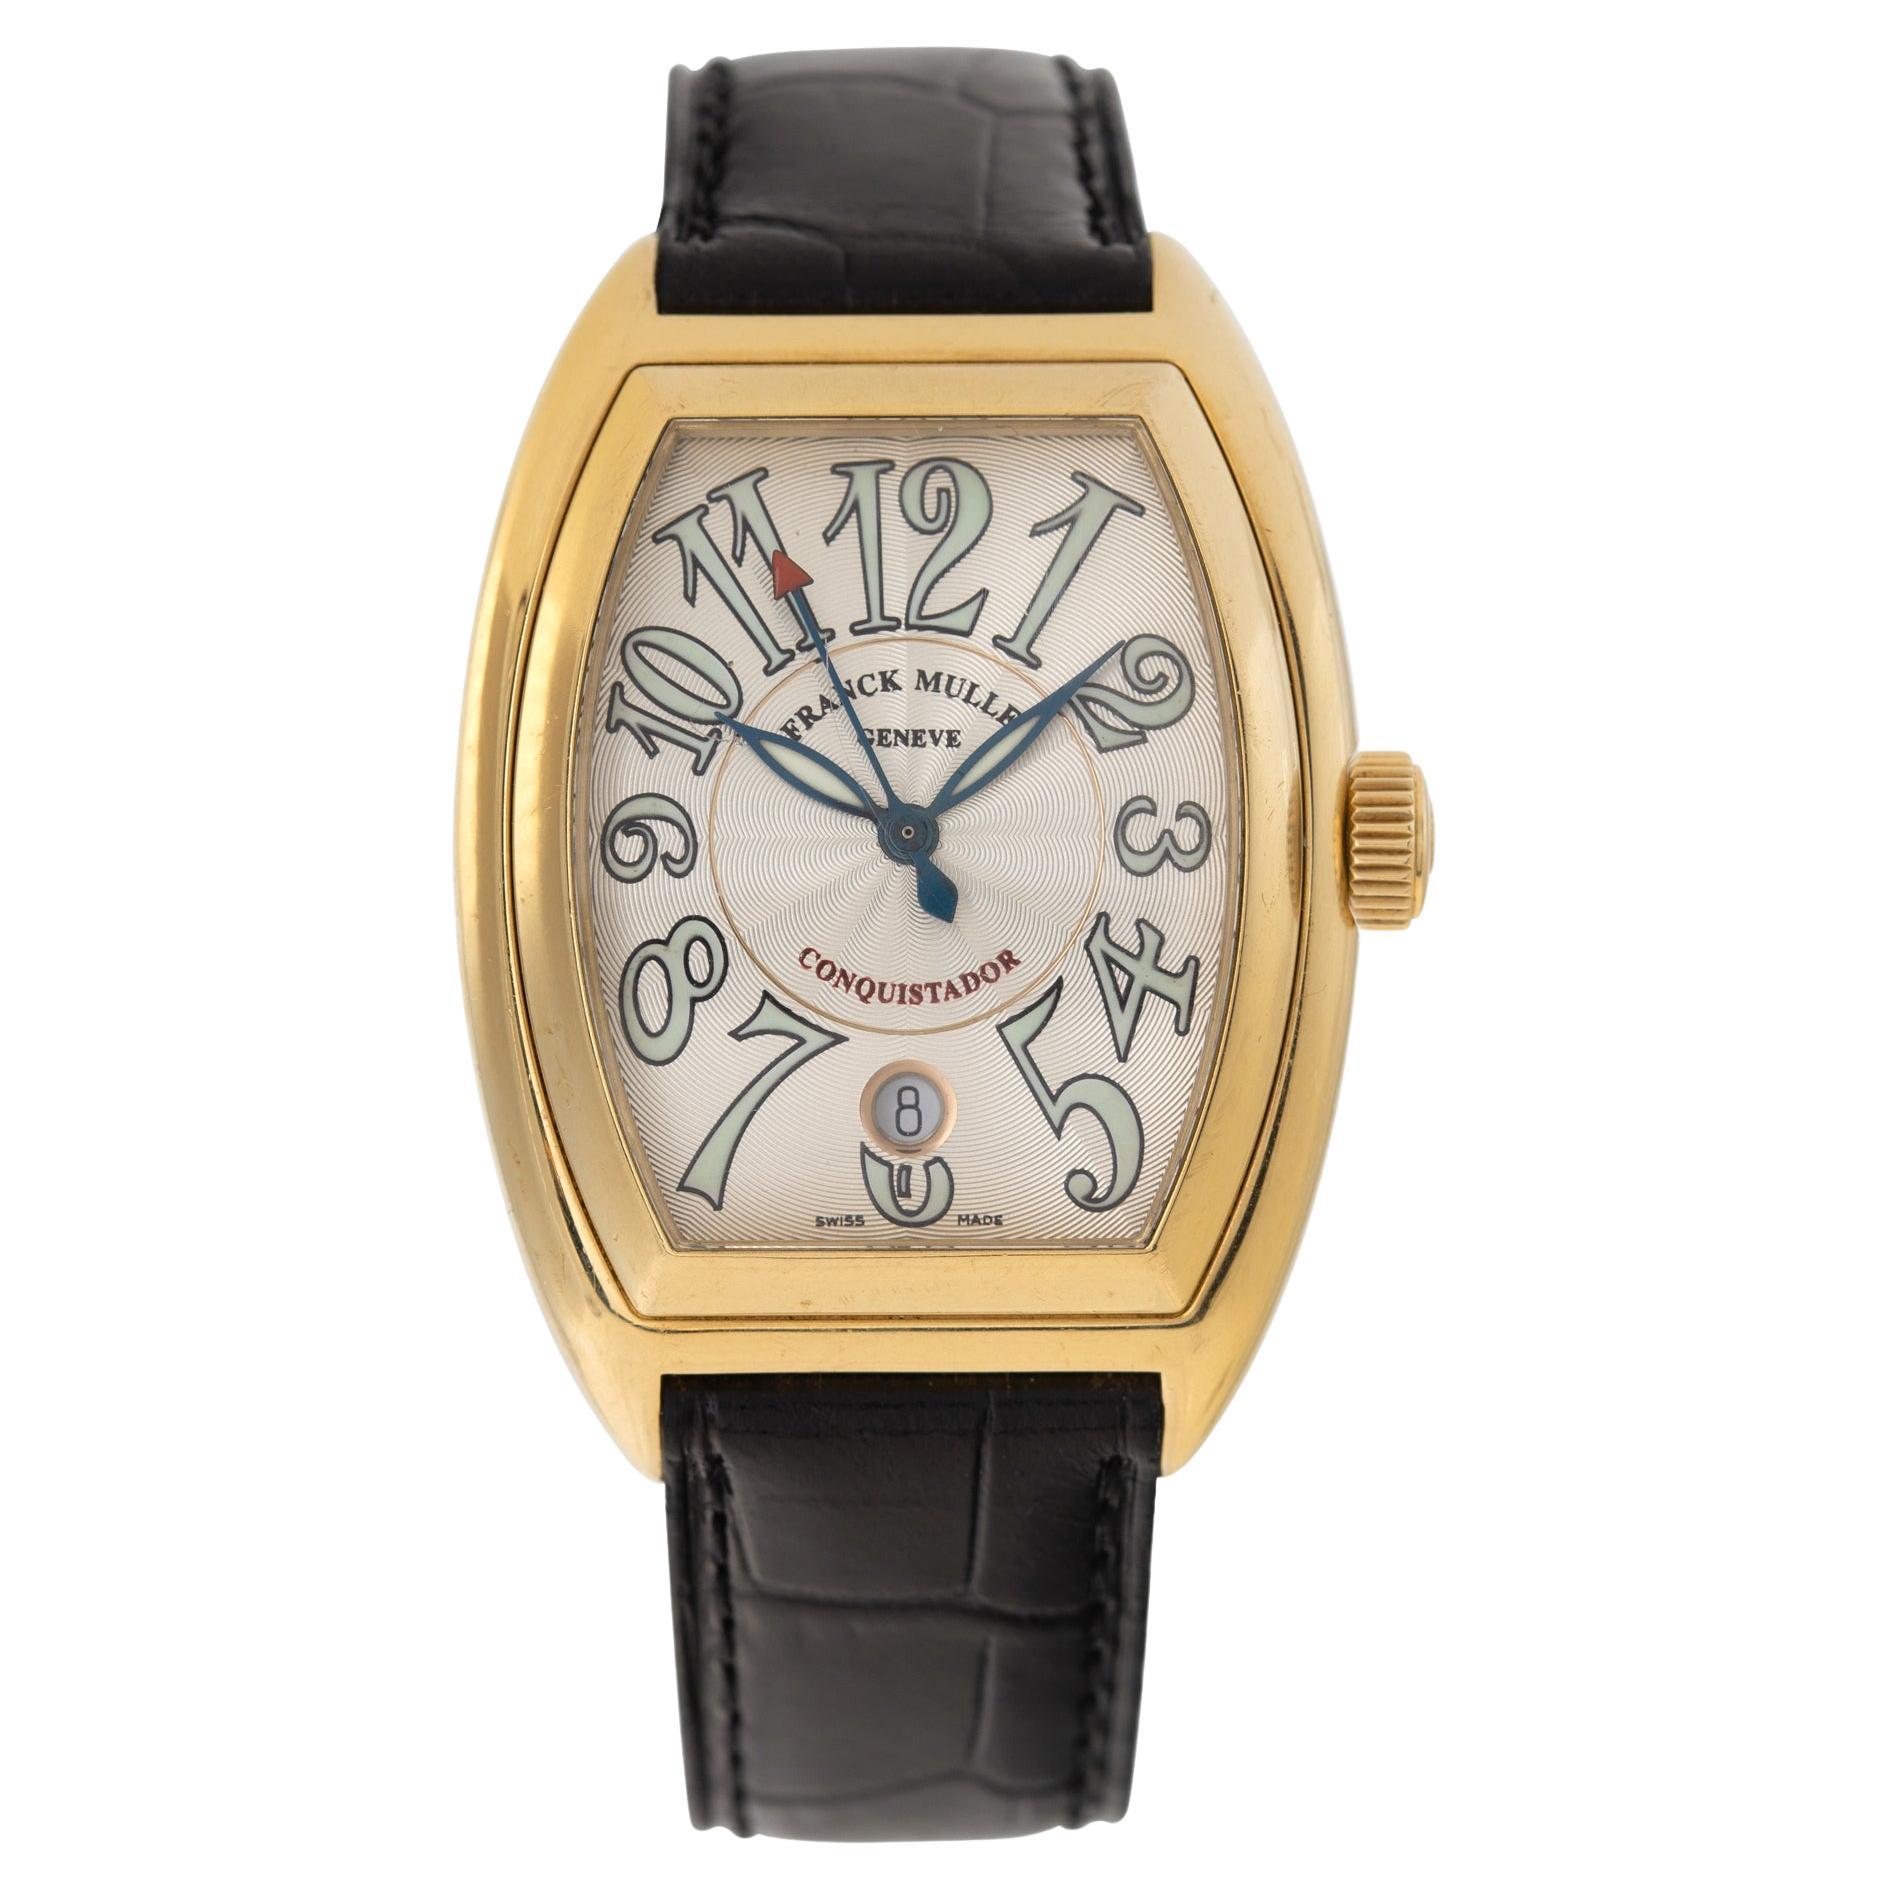 Franck Muller Conquistador 8001 sc in yellow gold with silver dial 35mm watch For Sale